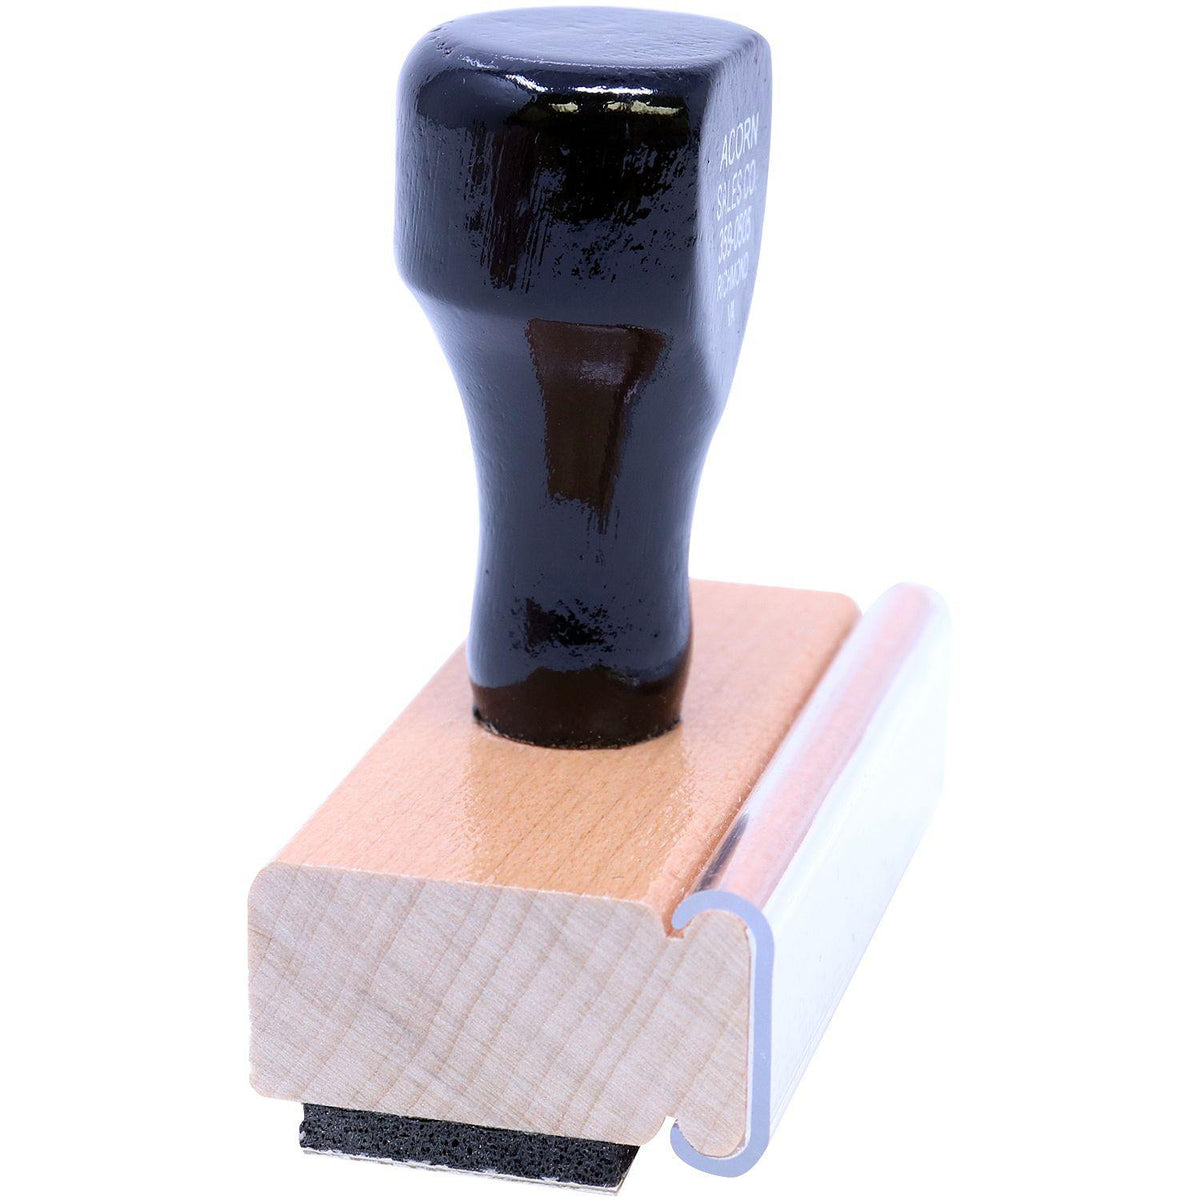 Large Telehealth Rubber Stamp - Engineer Seal Stamps - Brand_Acorn, Impression Size_Large, Stamp Type_Regular Stamp, Type of Use_Medical Office